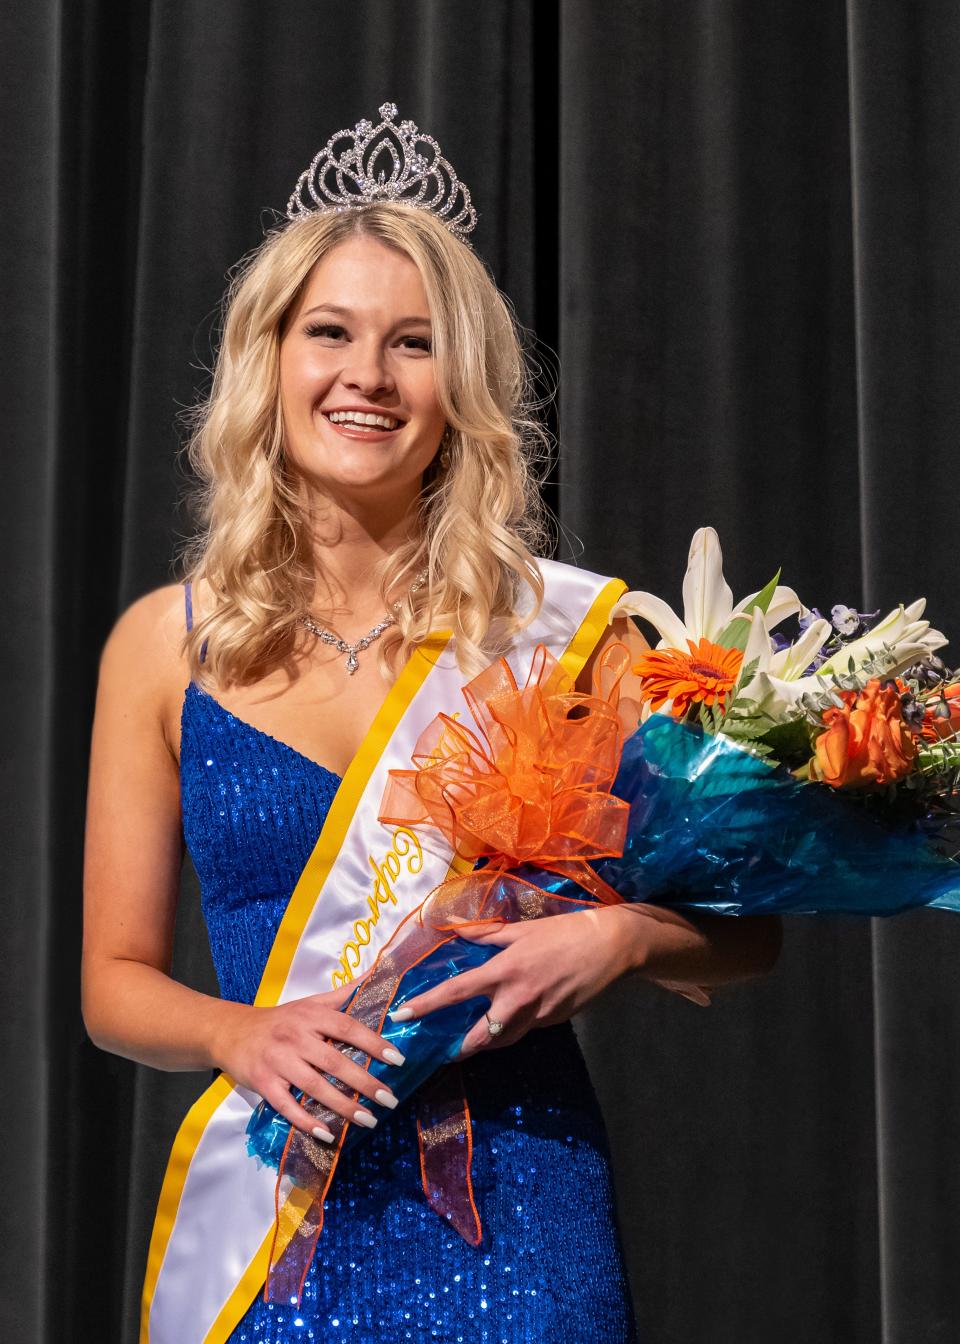 Machayla Parkinson of Levelland was selected as the 2022-23 Miss Caprock for South Plains College during the 64th Annual Miss Caprock Scholarship Pageant held Nov. 17 in the Tom T. Hall Production Studio.